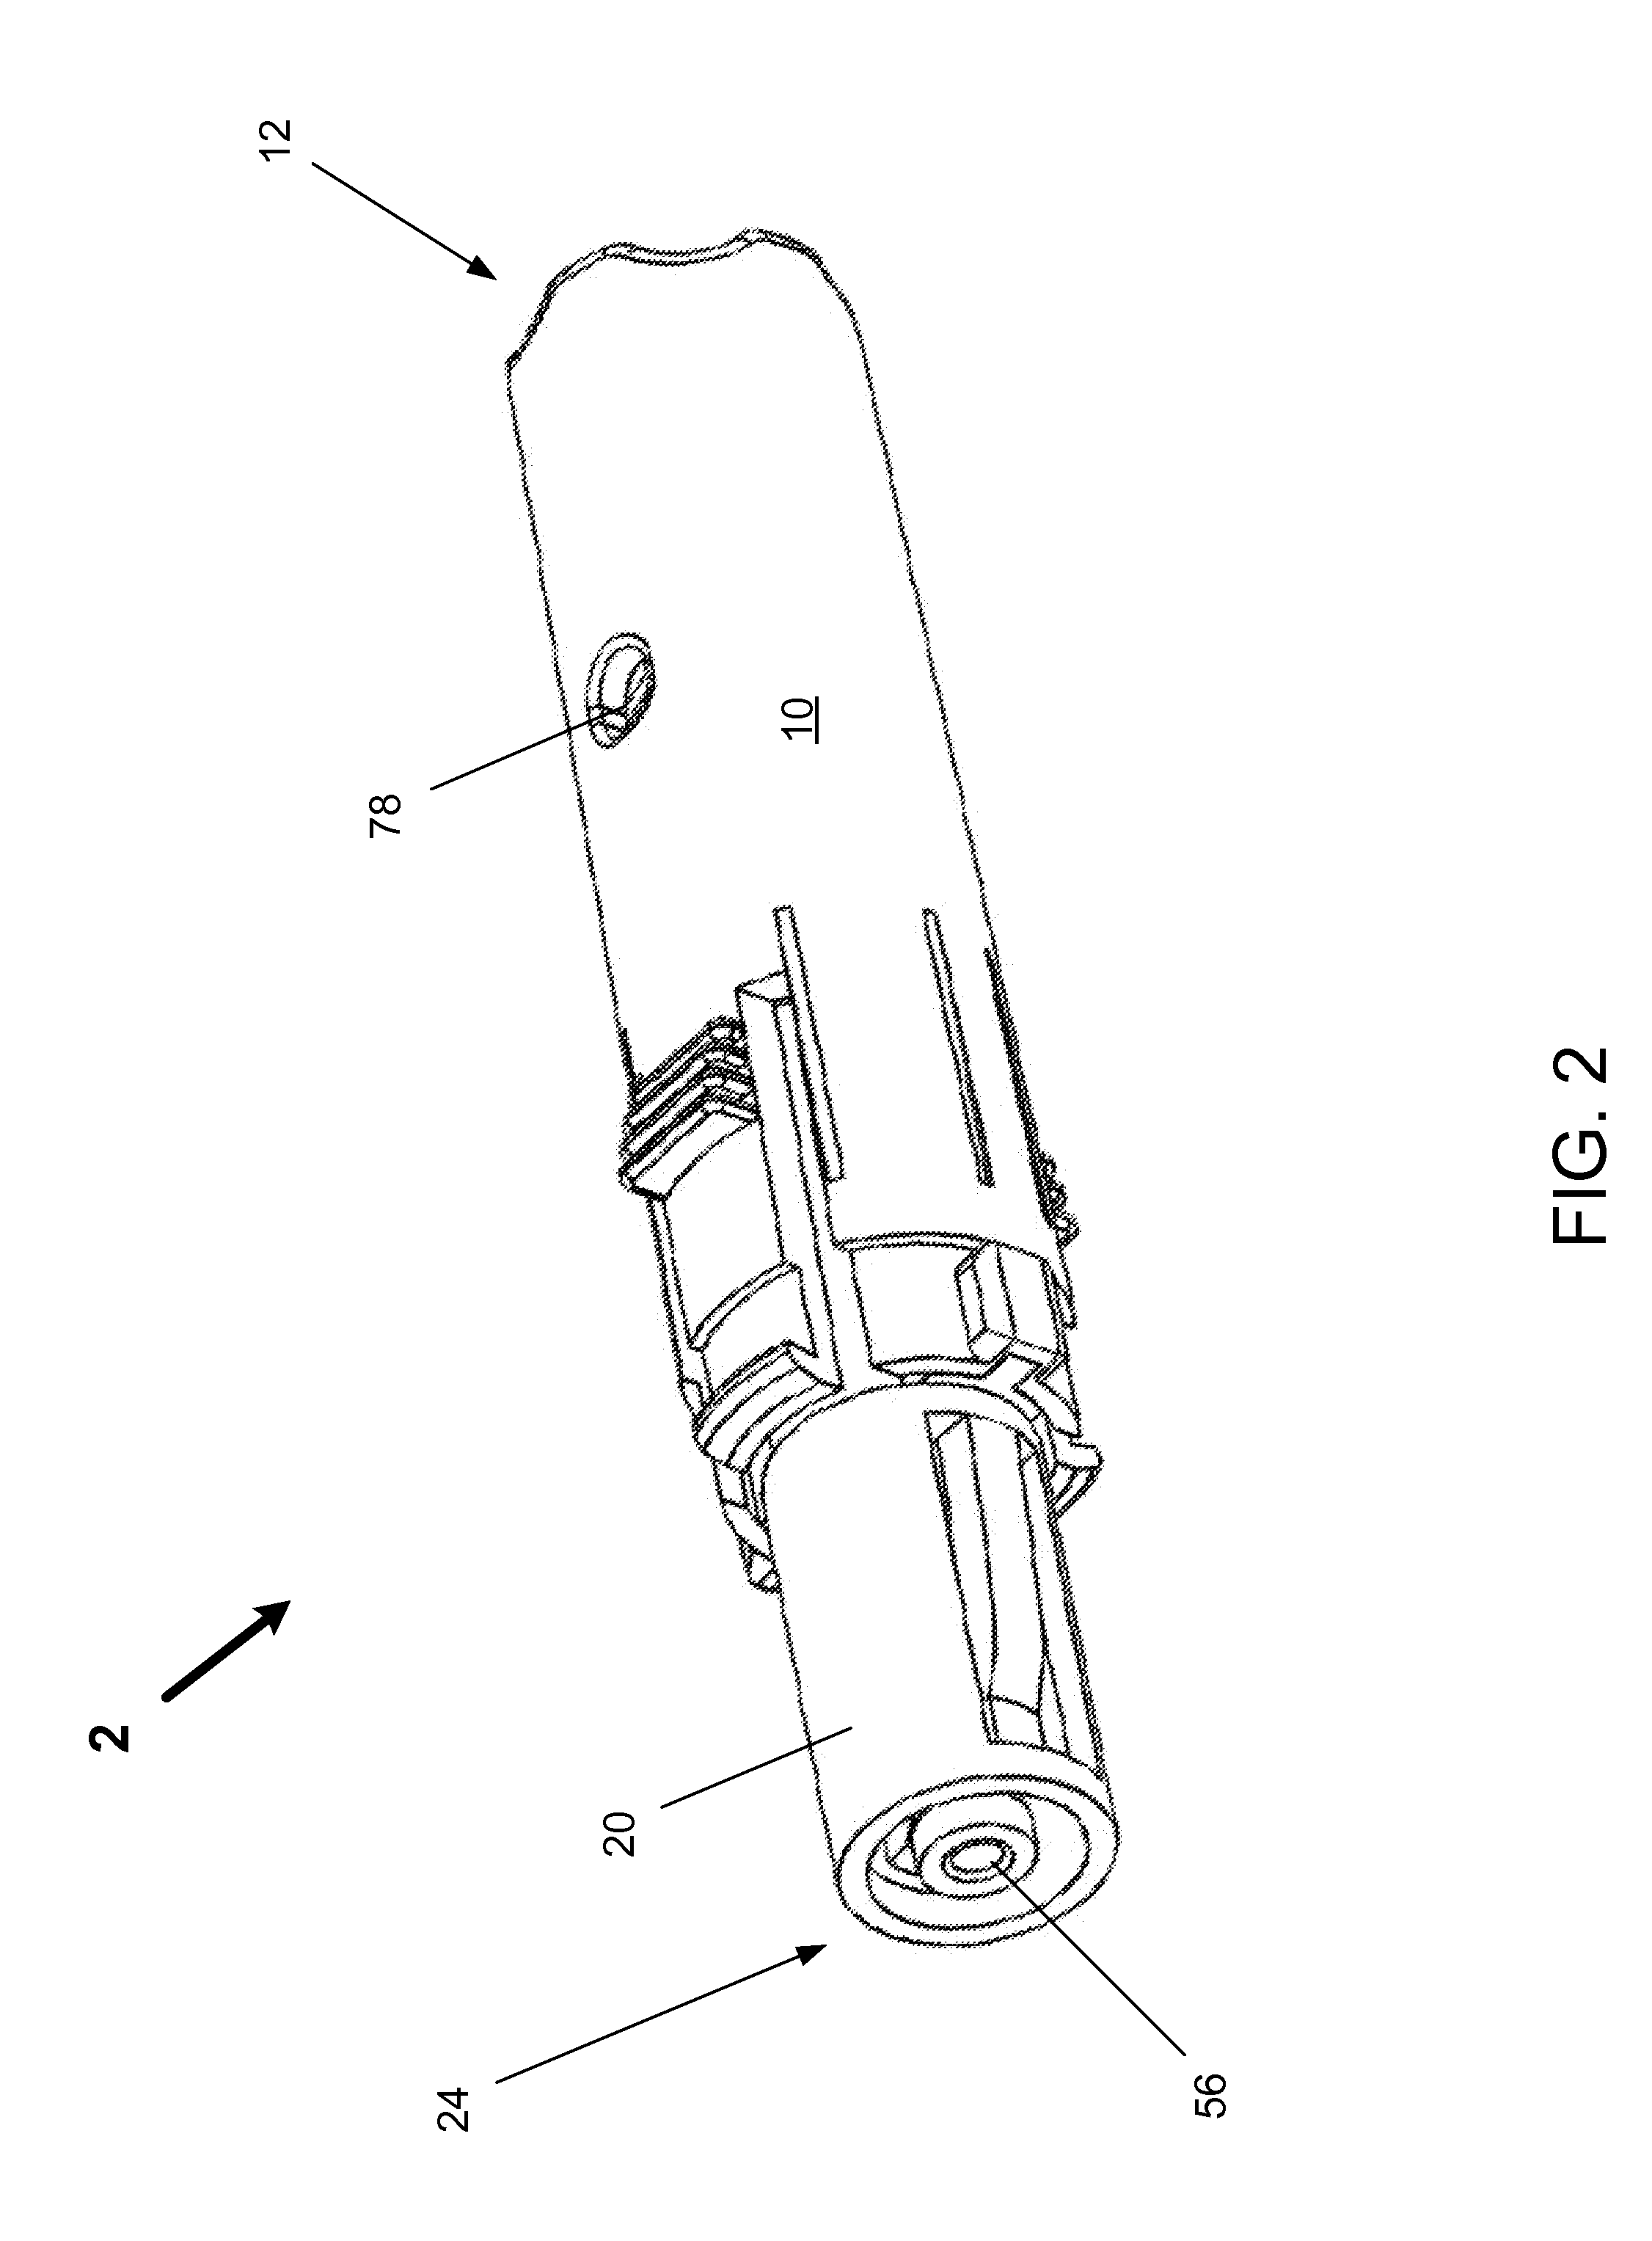 Skin puncturing device